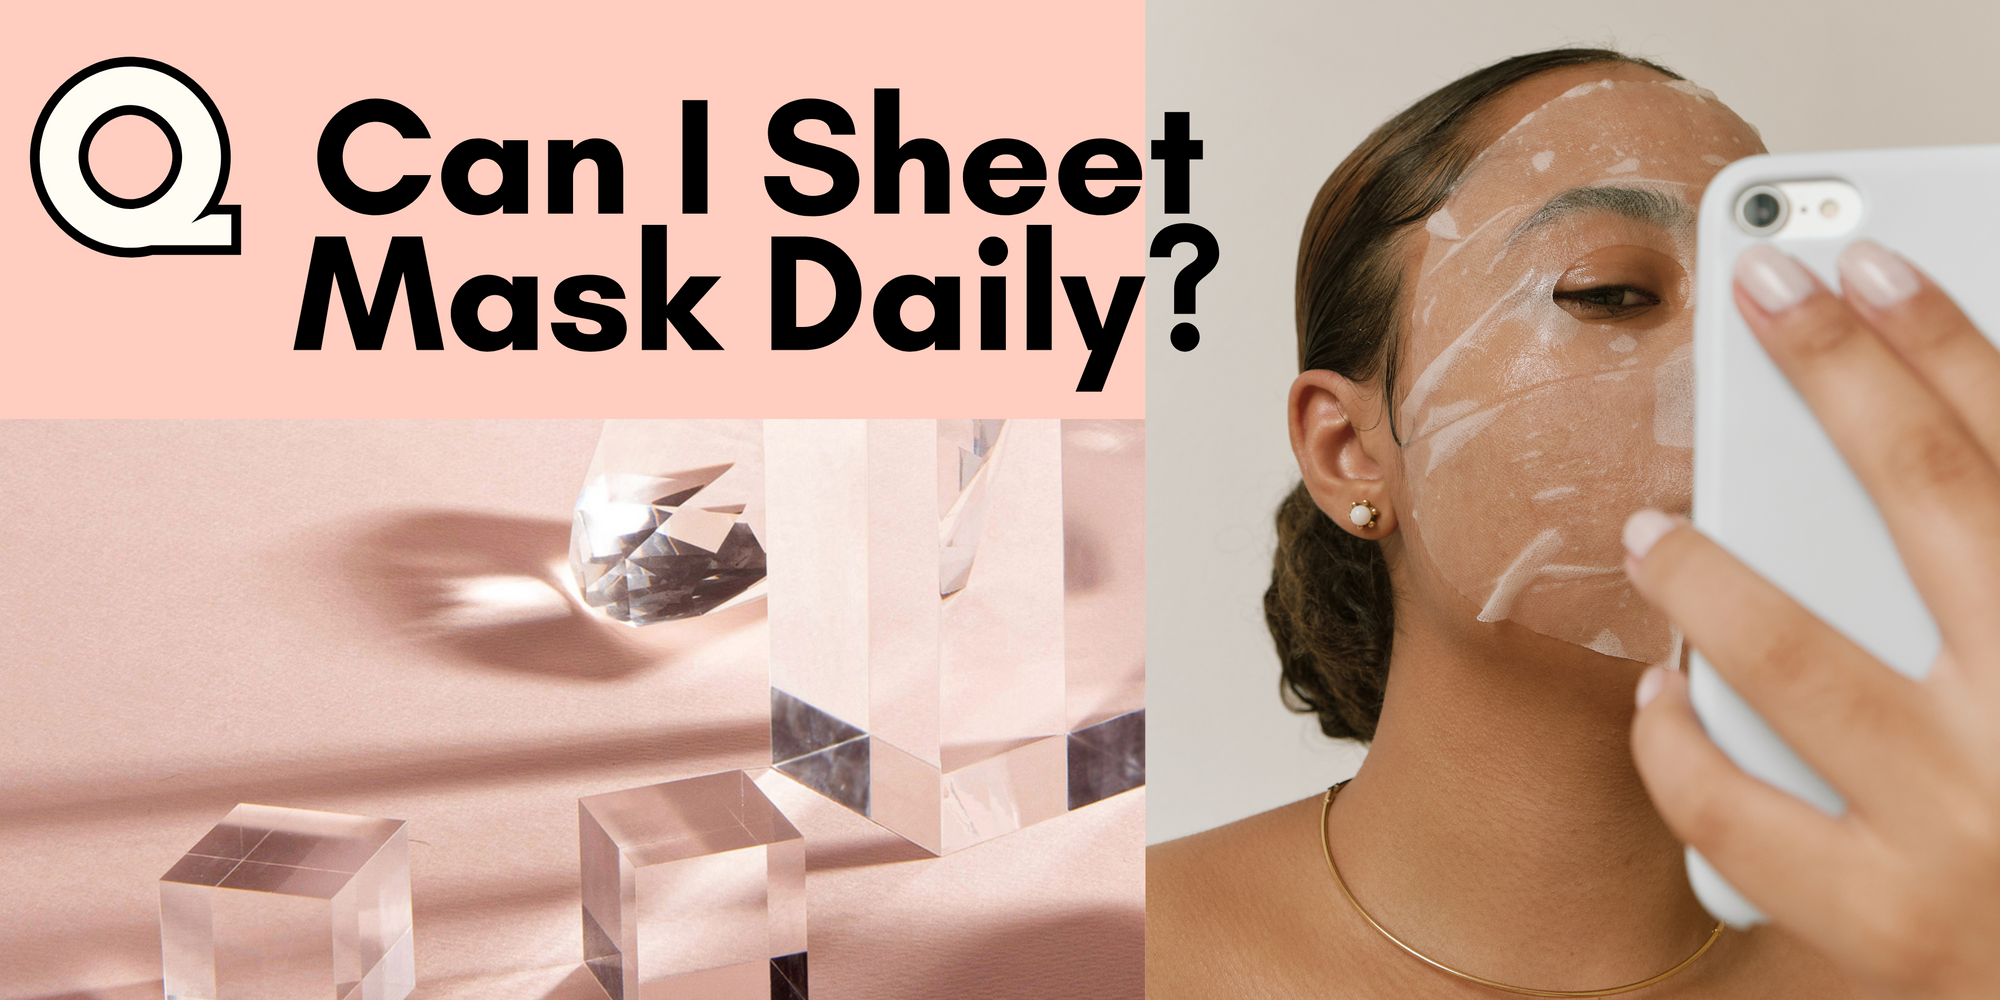 Is It Okay To Sheet Mask Daily?